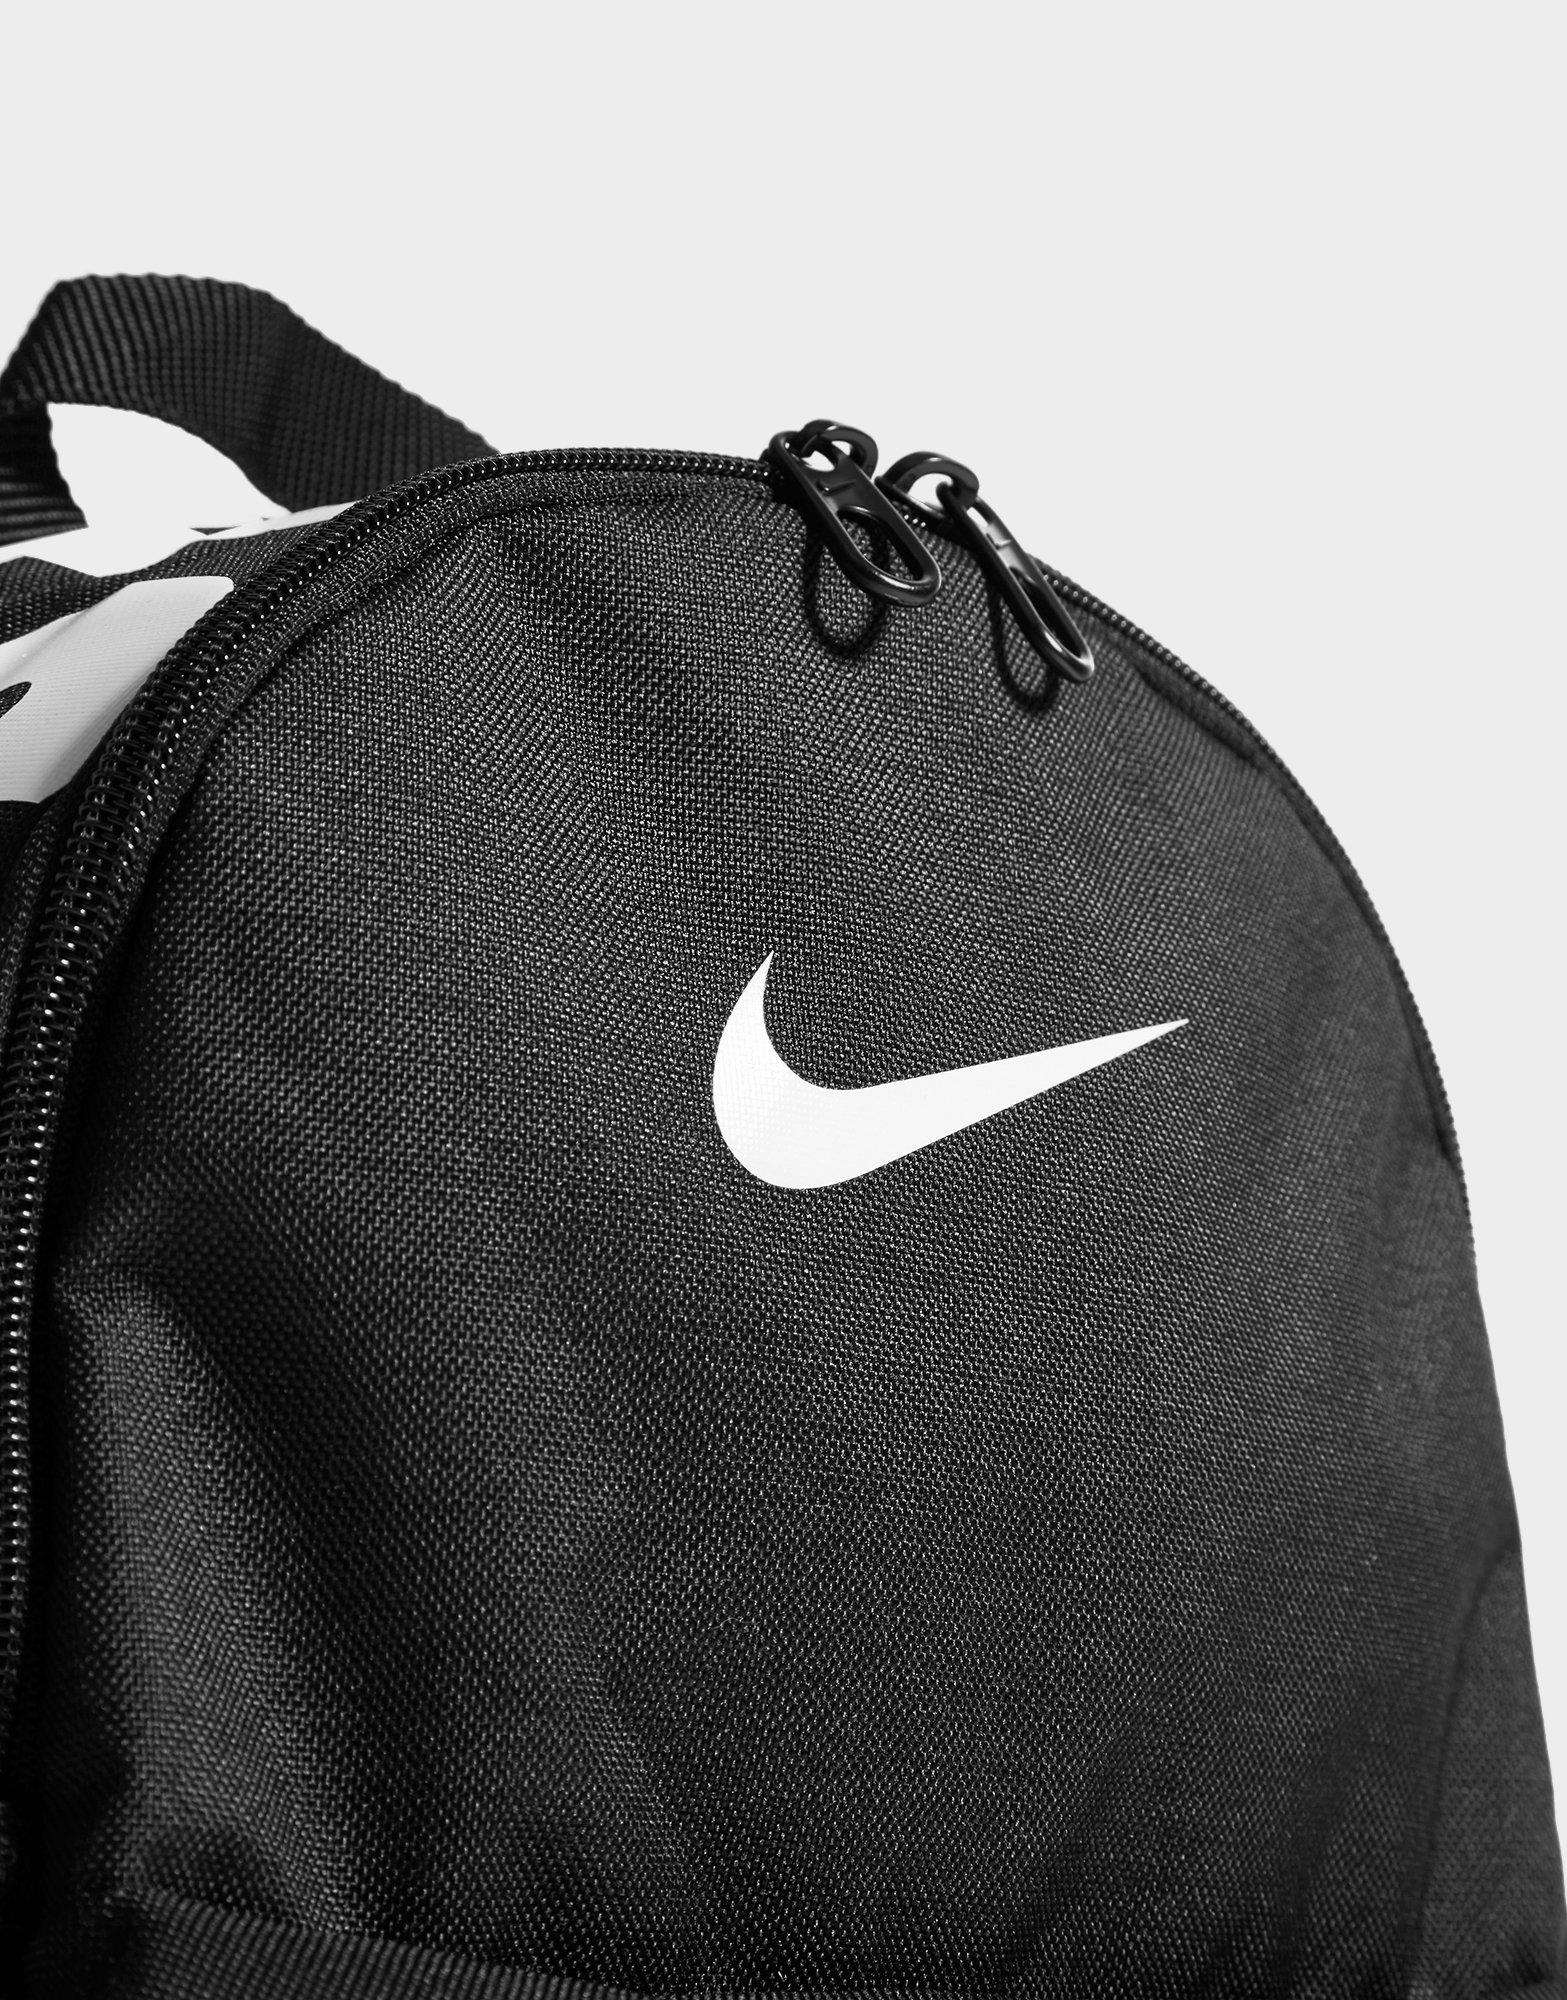 nike just do it backpack